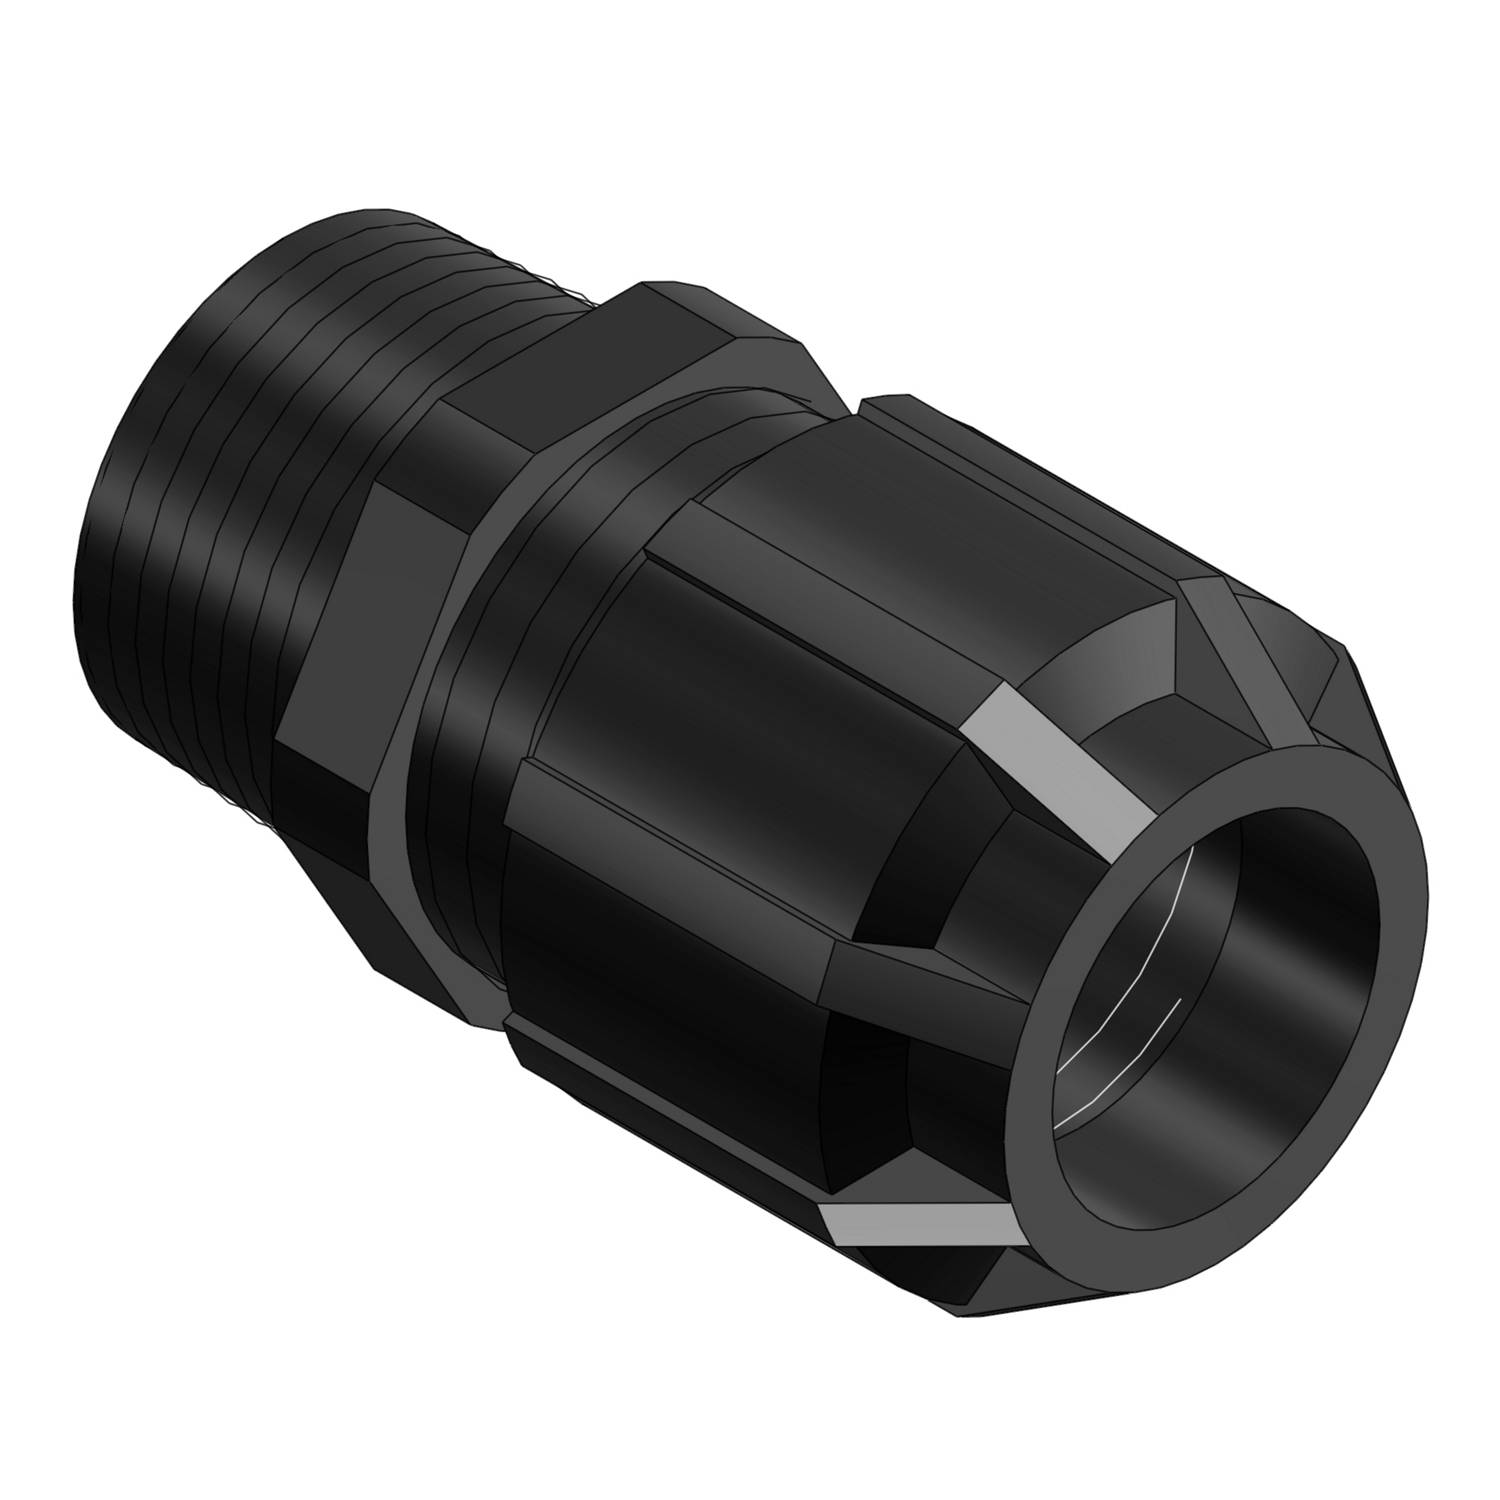 T&B® 2941NM Ranger® Liquidtight Strain Relief Cord Connector, 1 in Trade, 1/2 to 3/4 in Cable Openings, Nylon 6.6/Polyamide